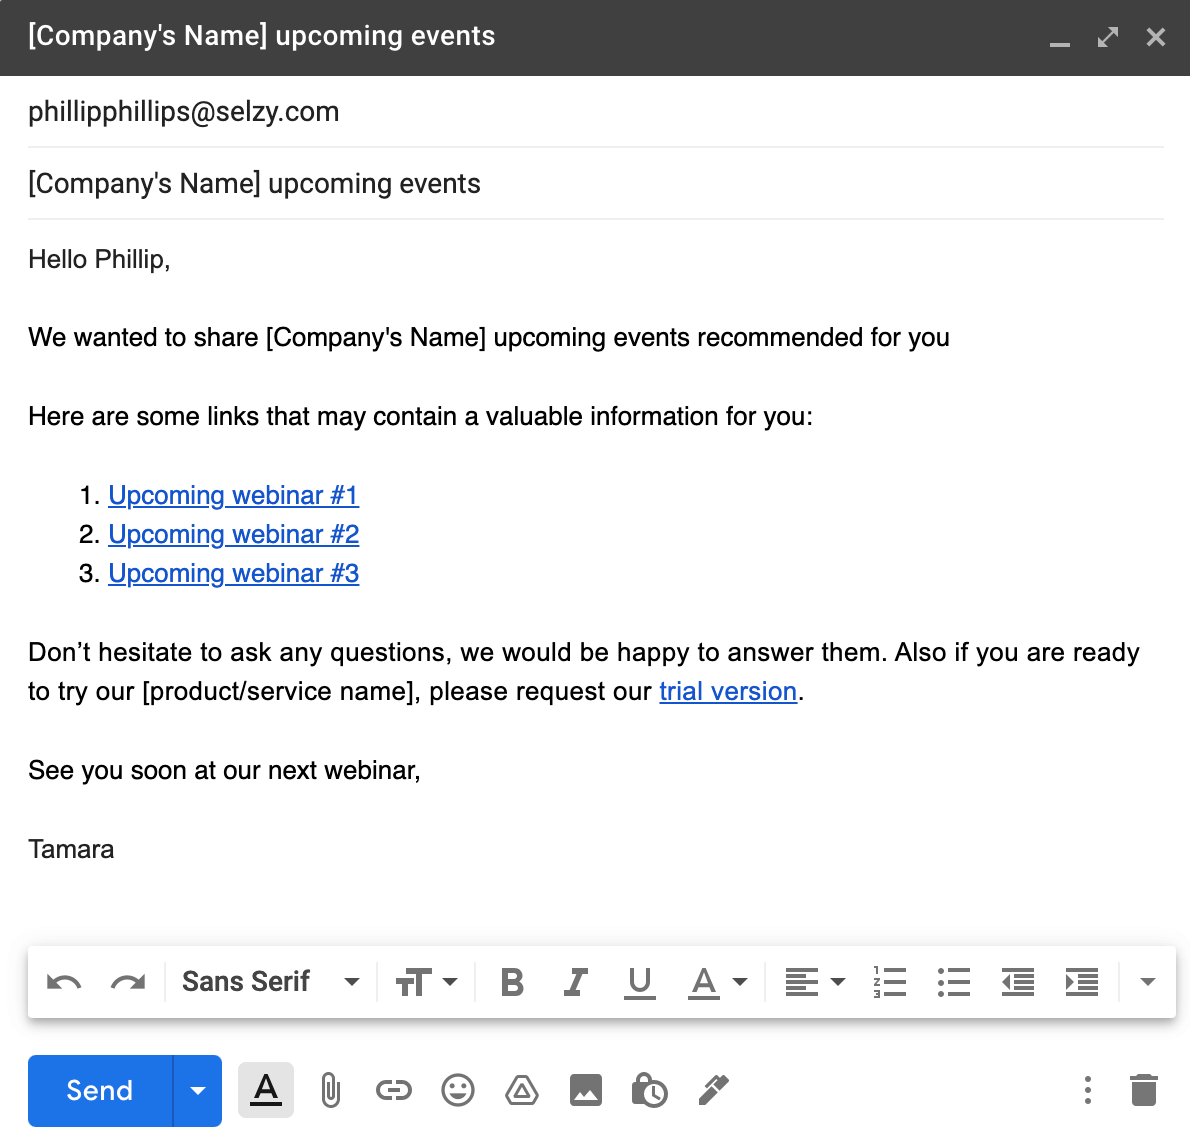 Third follow-up email with upcoming events